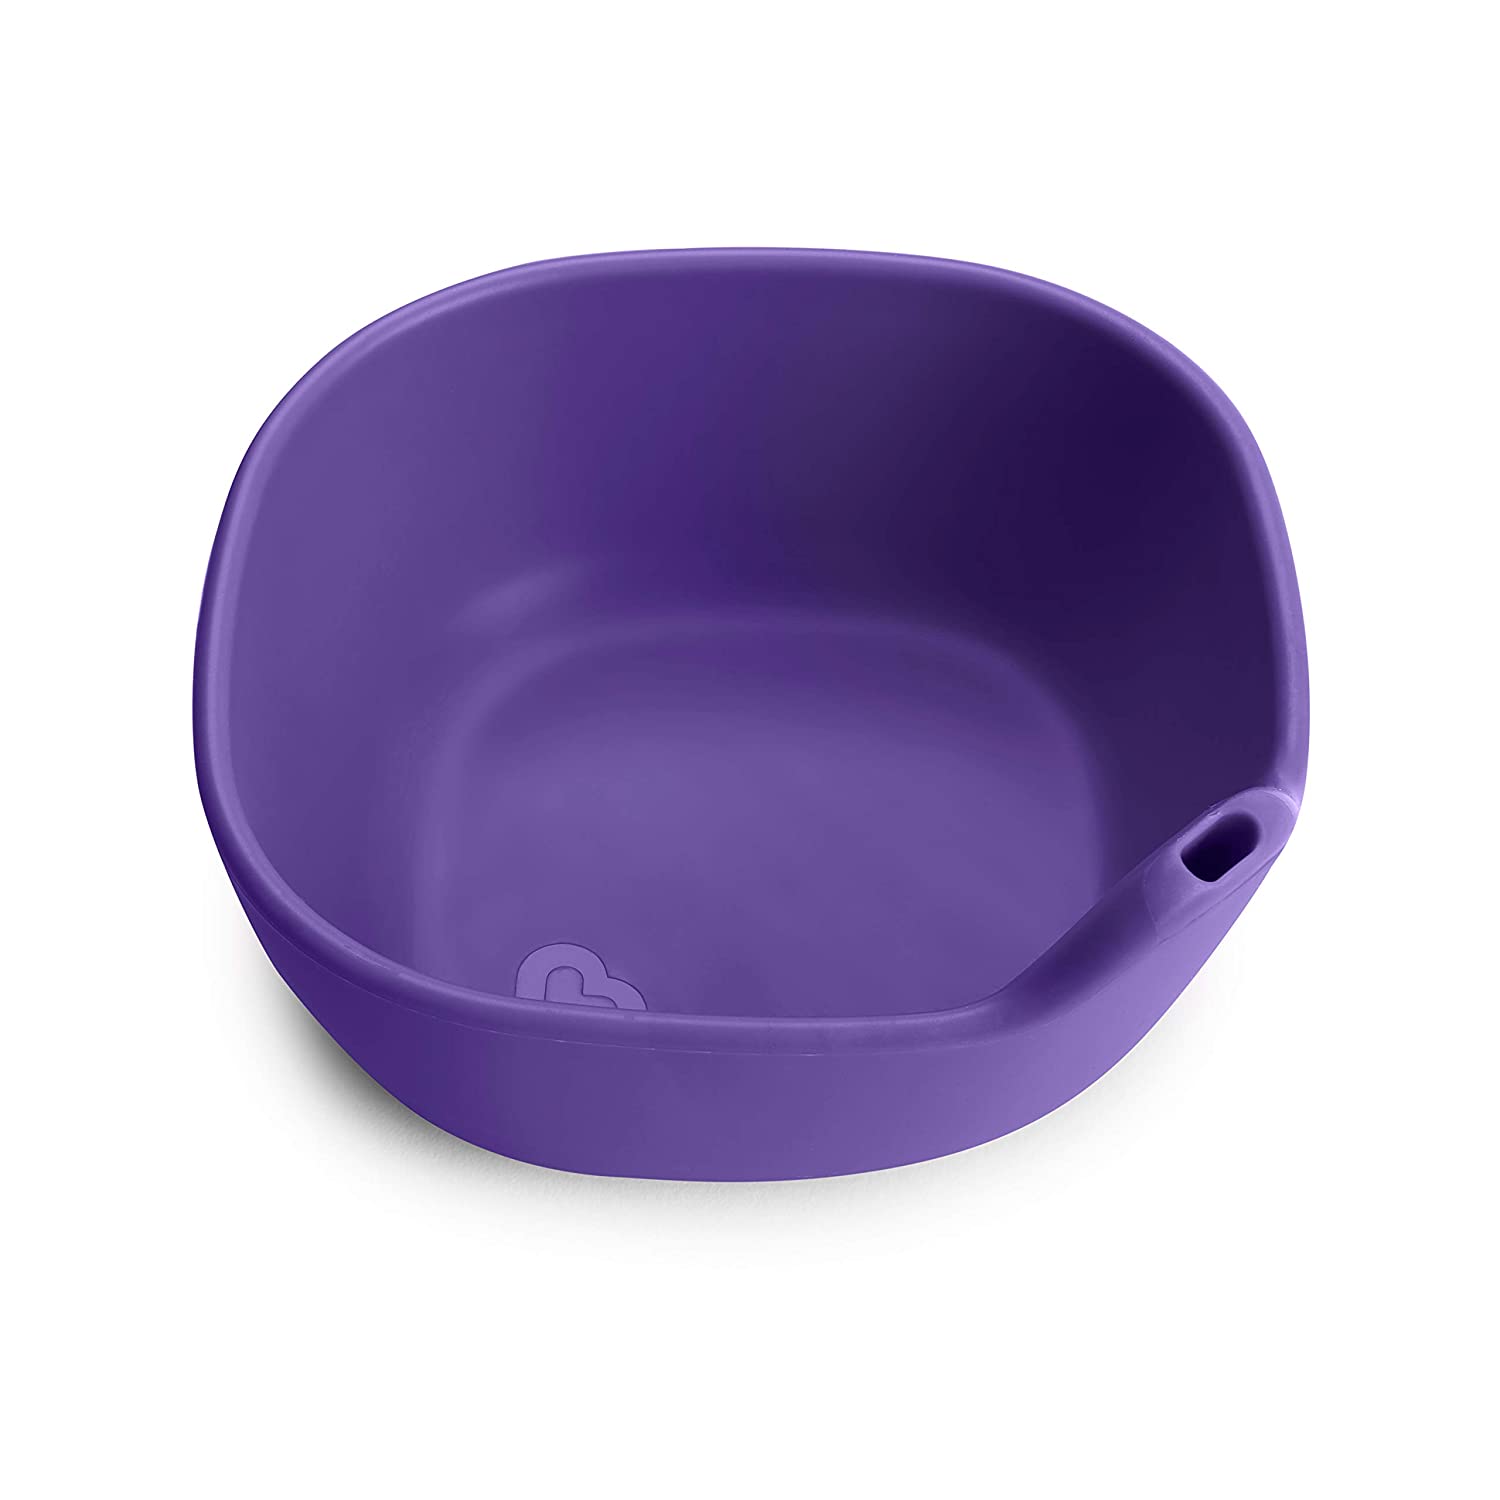 Munchkin Last Drop Silicone Toddler Bowl with Built-In Straw for Only